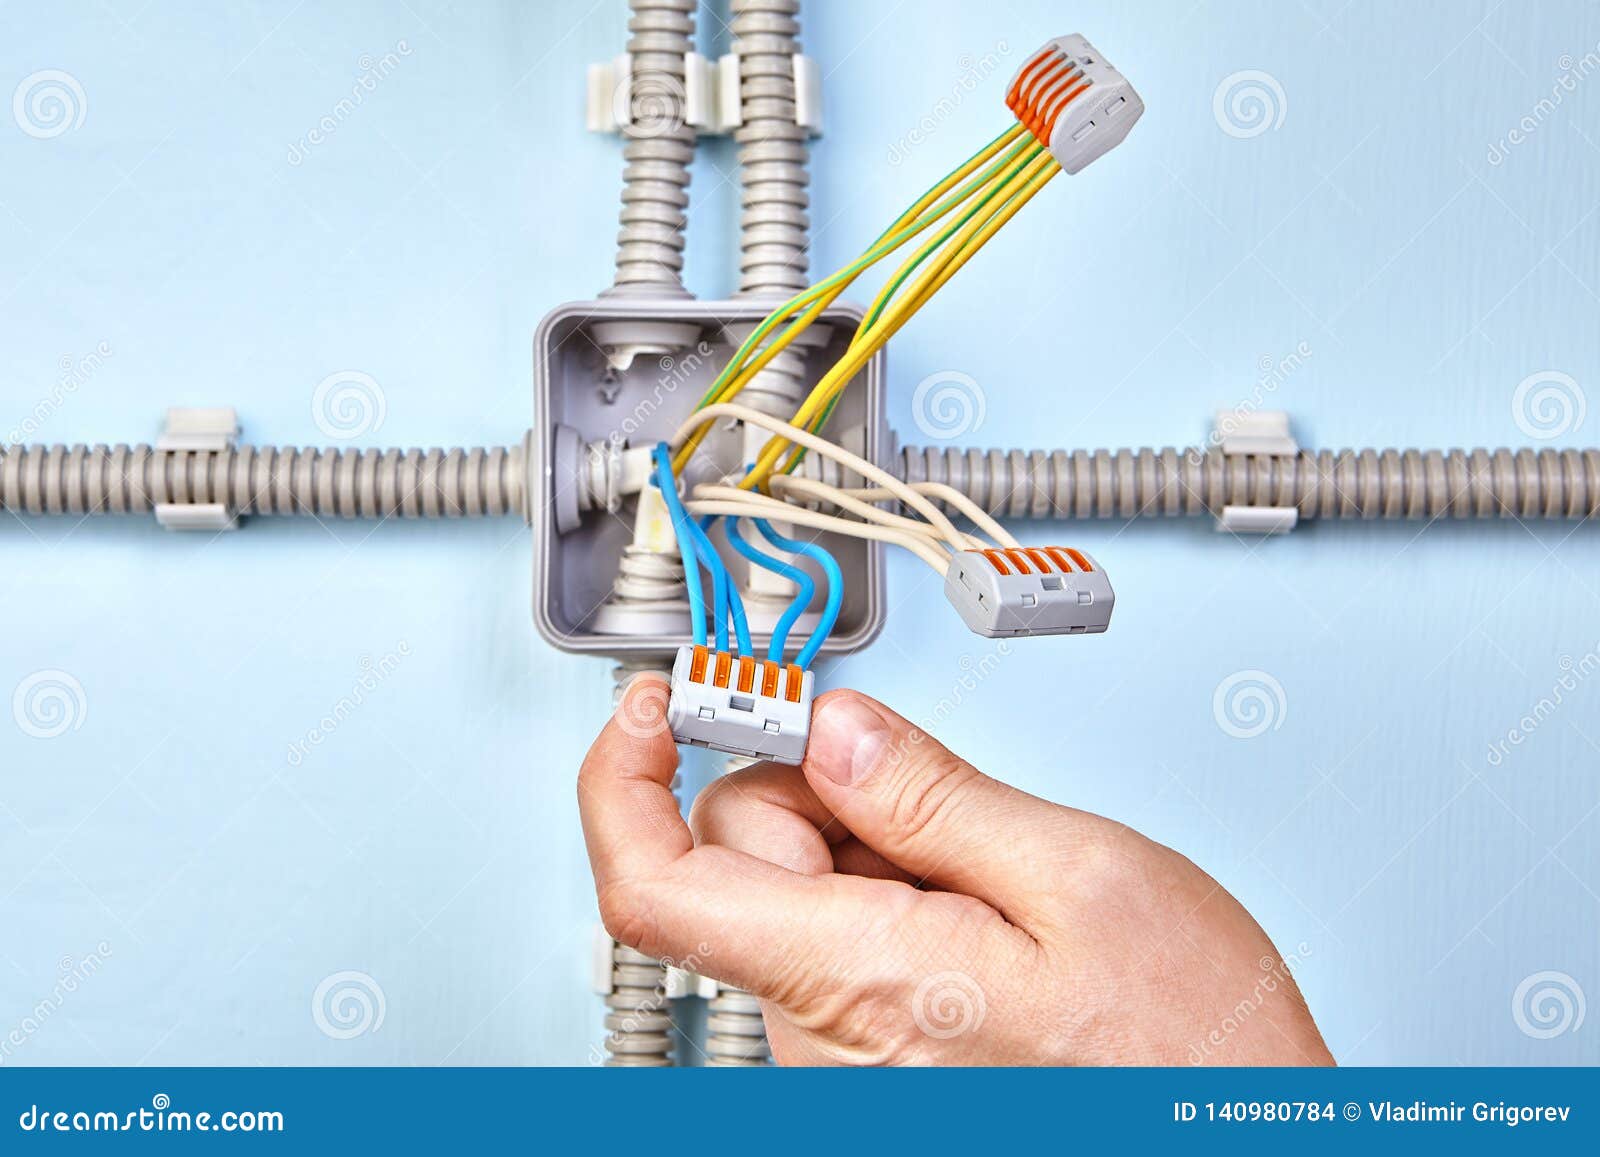 Using Joining Wire for Connecting Wires Stock Photo - Image of